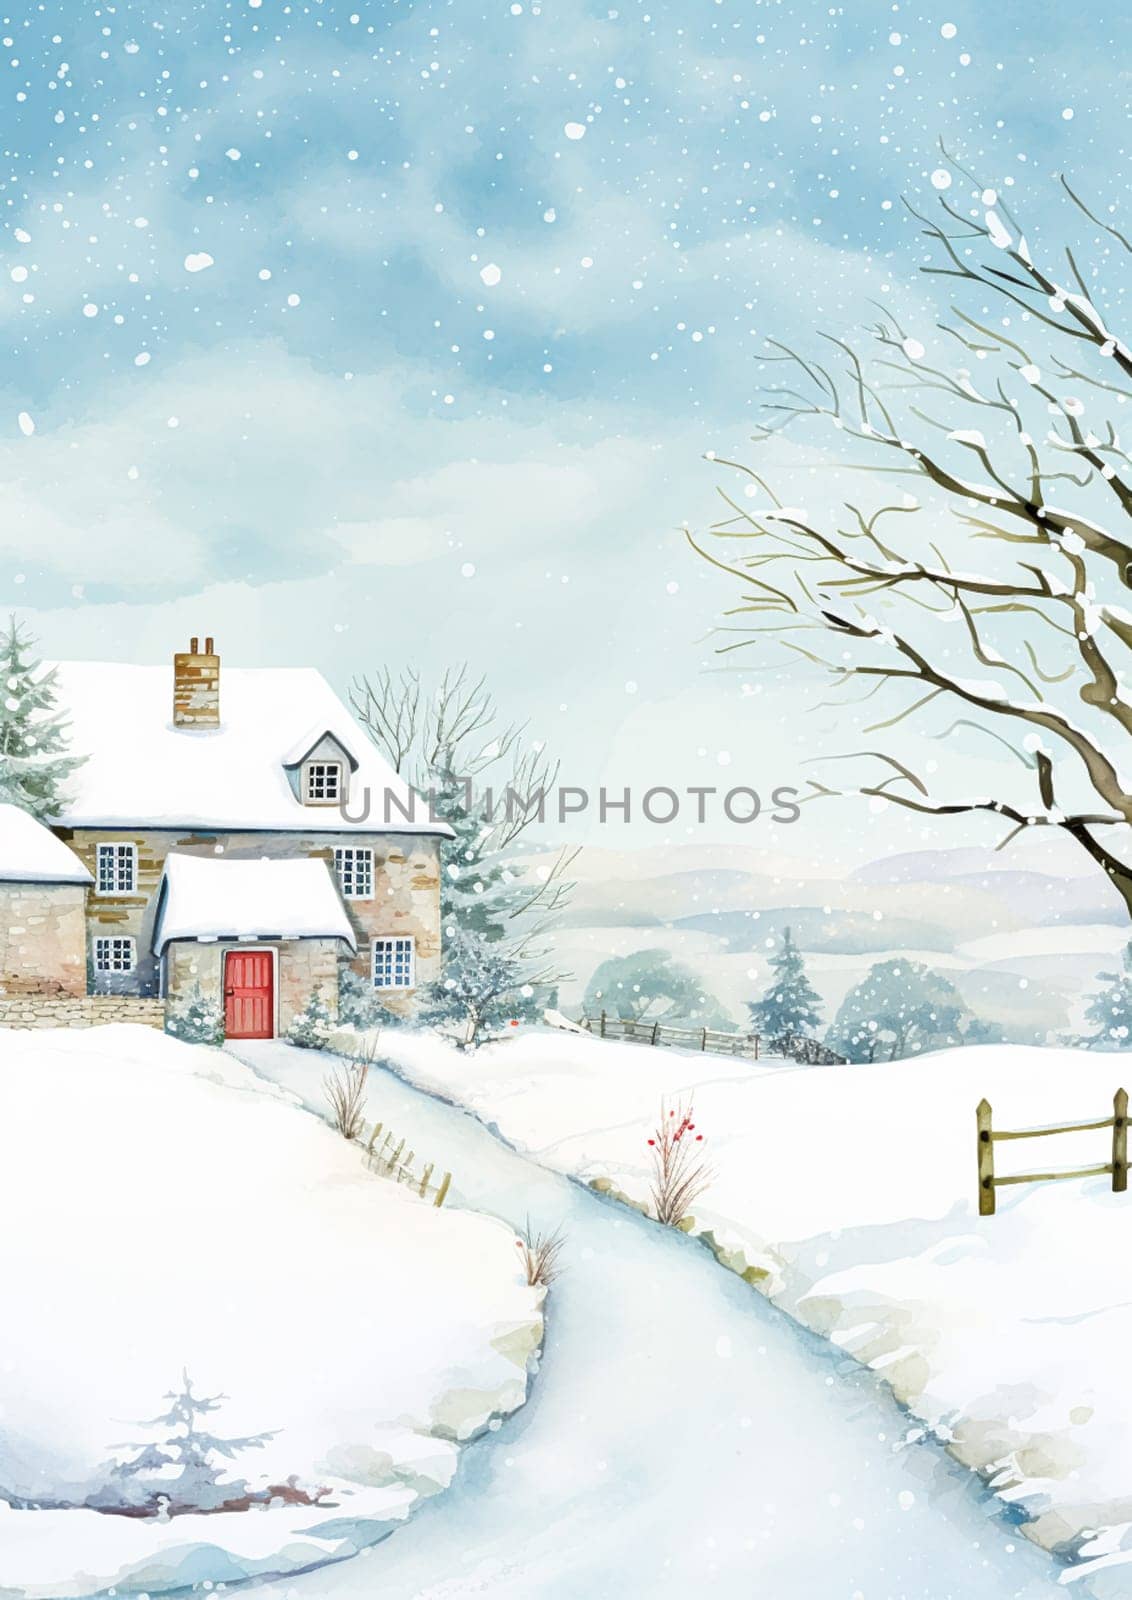 Merry Christmas and Happy Holidays, watercolour printable art print, English countryside cottage as snow winter holiday Christmas card, thank you and diy greeting card design, country style by Anneleven